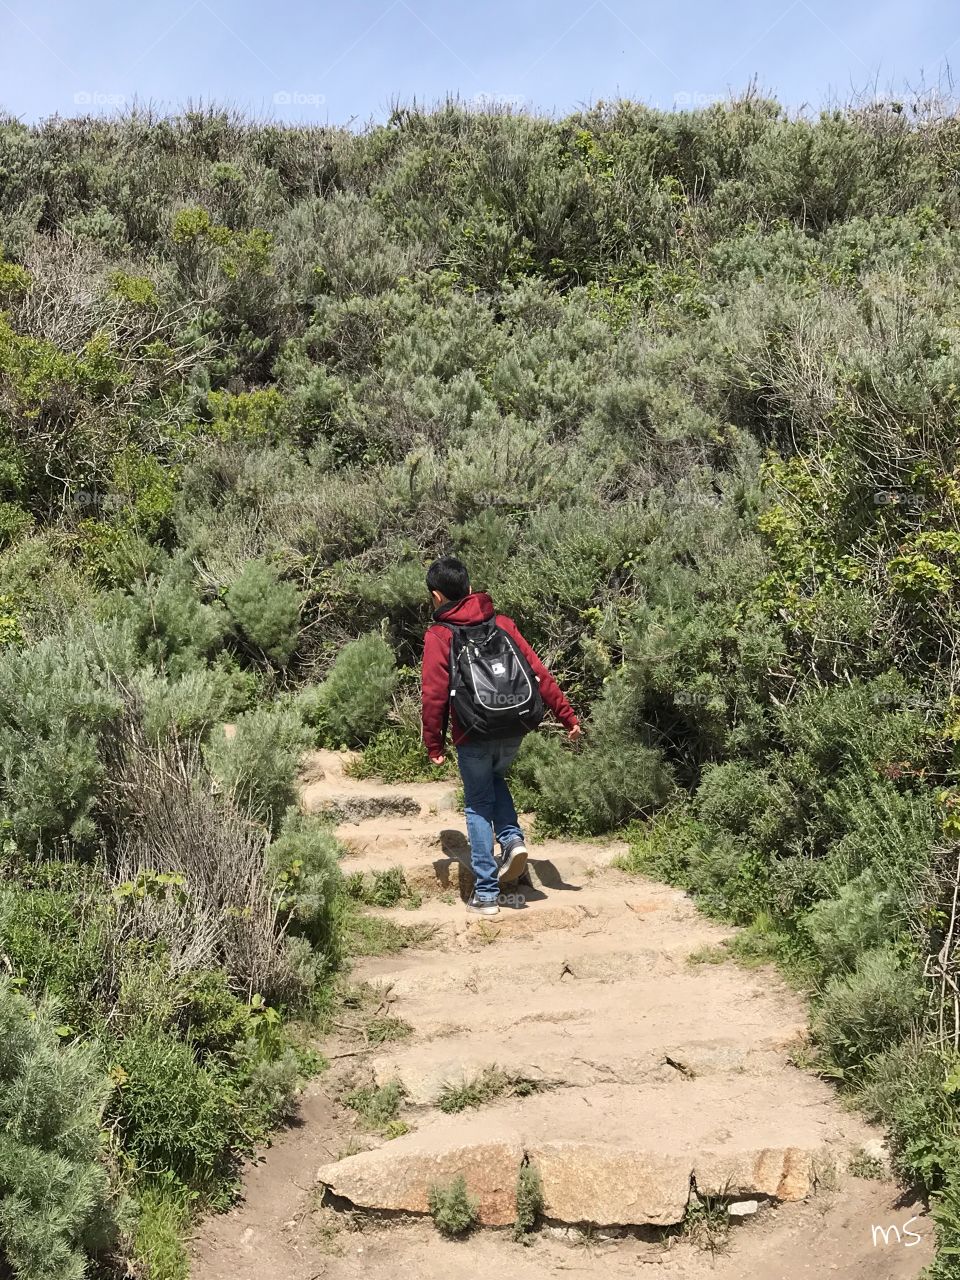 Boy meets nature out in Point Lobos State Reserve in the Monterey Bay (CA). Perfect day for hiking around a wonderful jewel of nature. He’s 12, and he loved it. #NoFilters